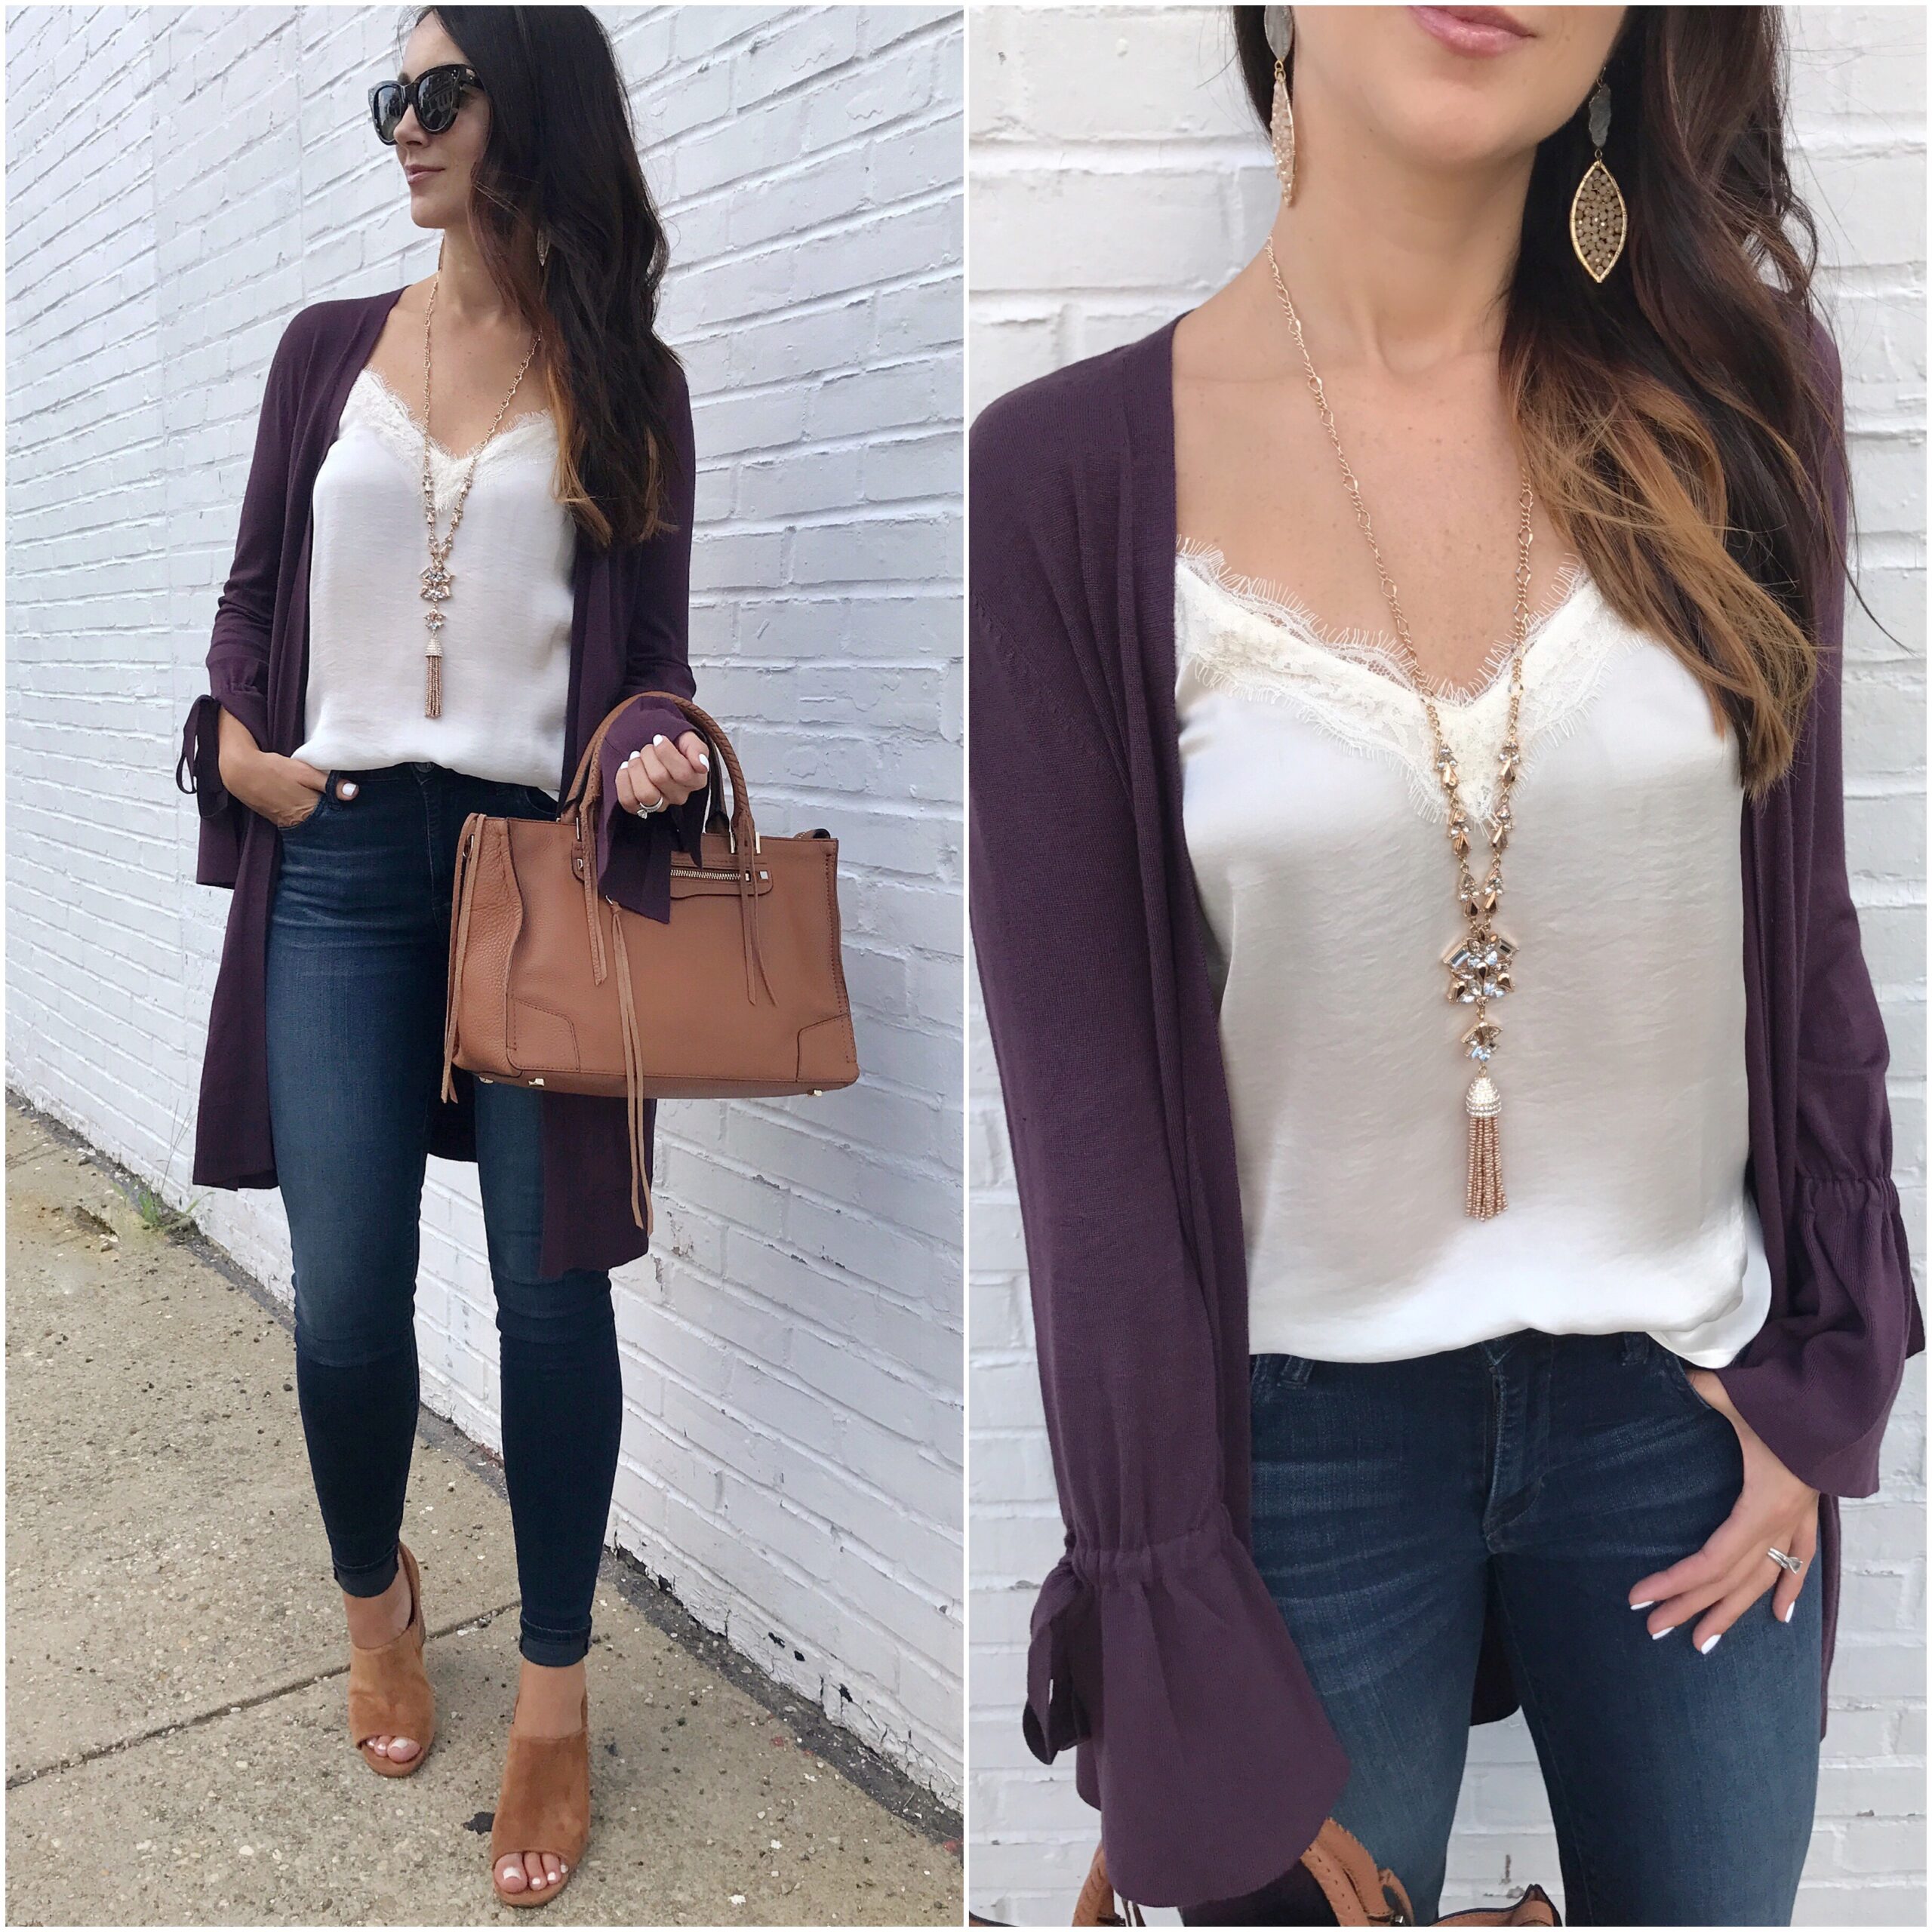 fashion blogger Anna Monteiro of Blushing Rose Style wearing tie sleeve halogen lace trim camisole and rebecca minkoff satchel in summer to fall outfits from nordstrom